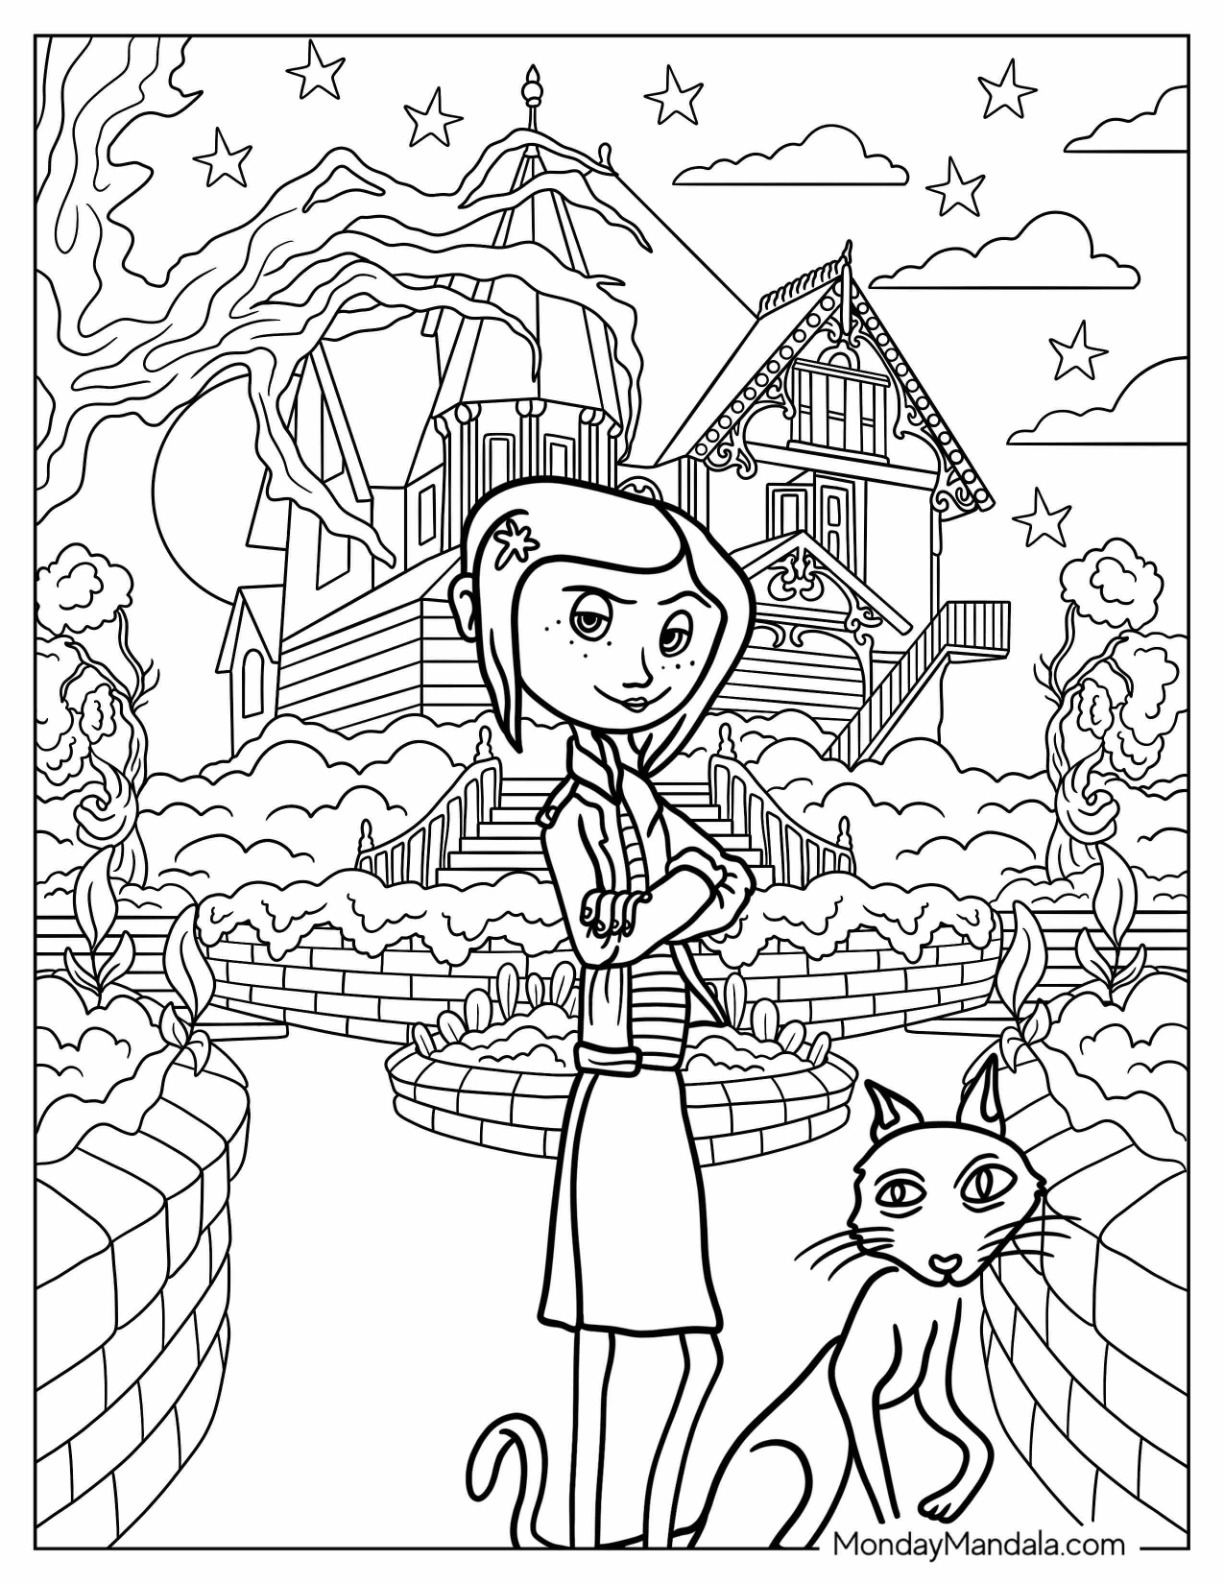 Coraline coloring pages free pdf printables